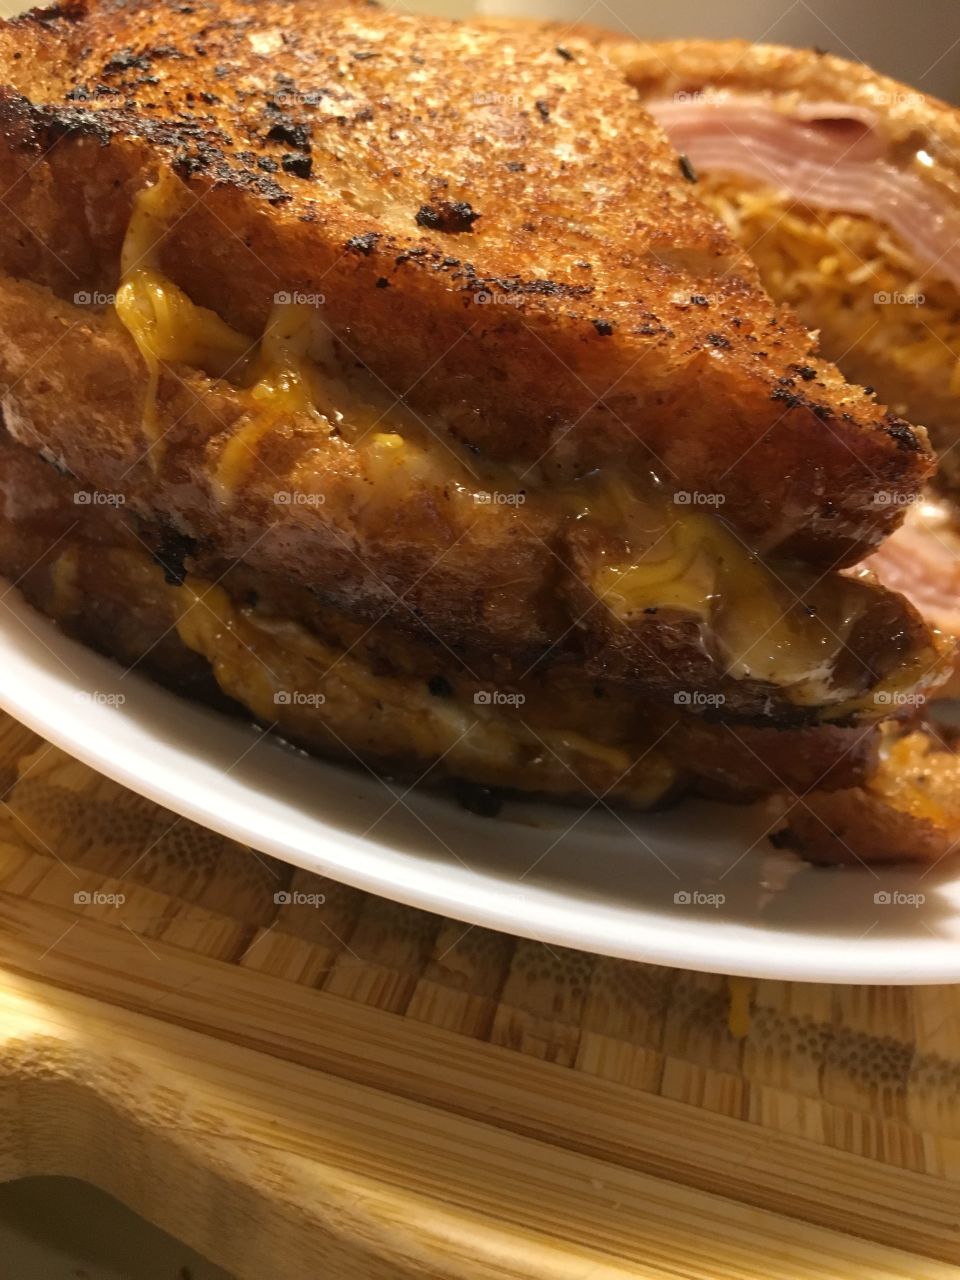 Turkey, peanut butter and cheese fried sandwich